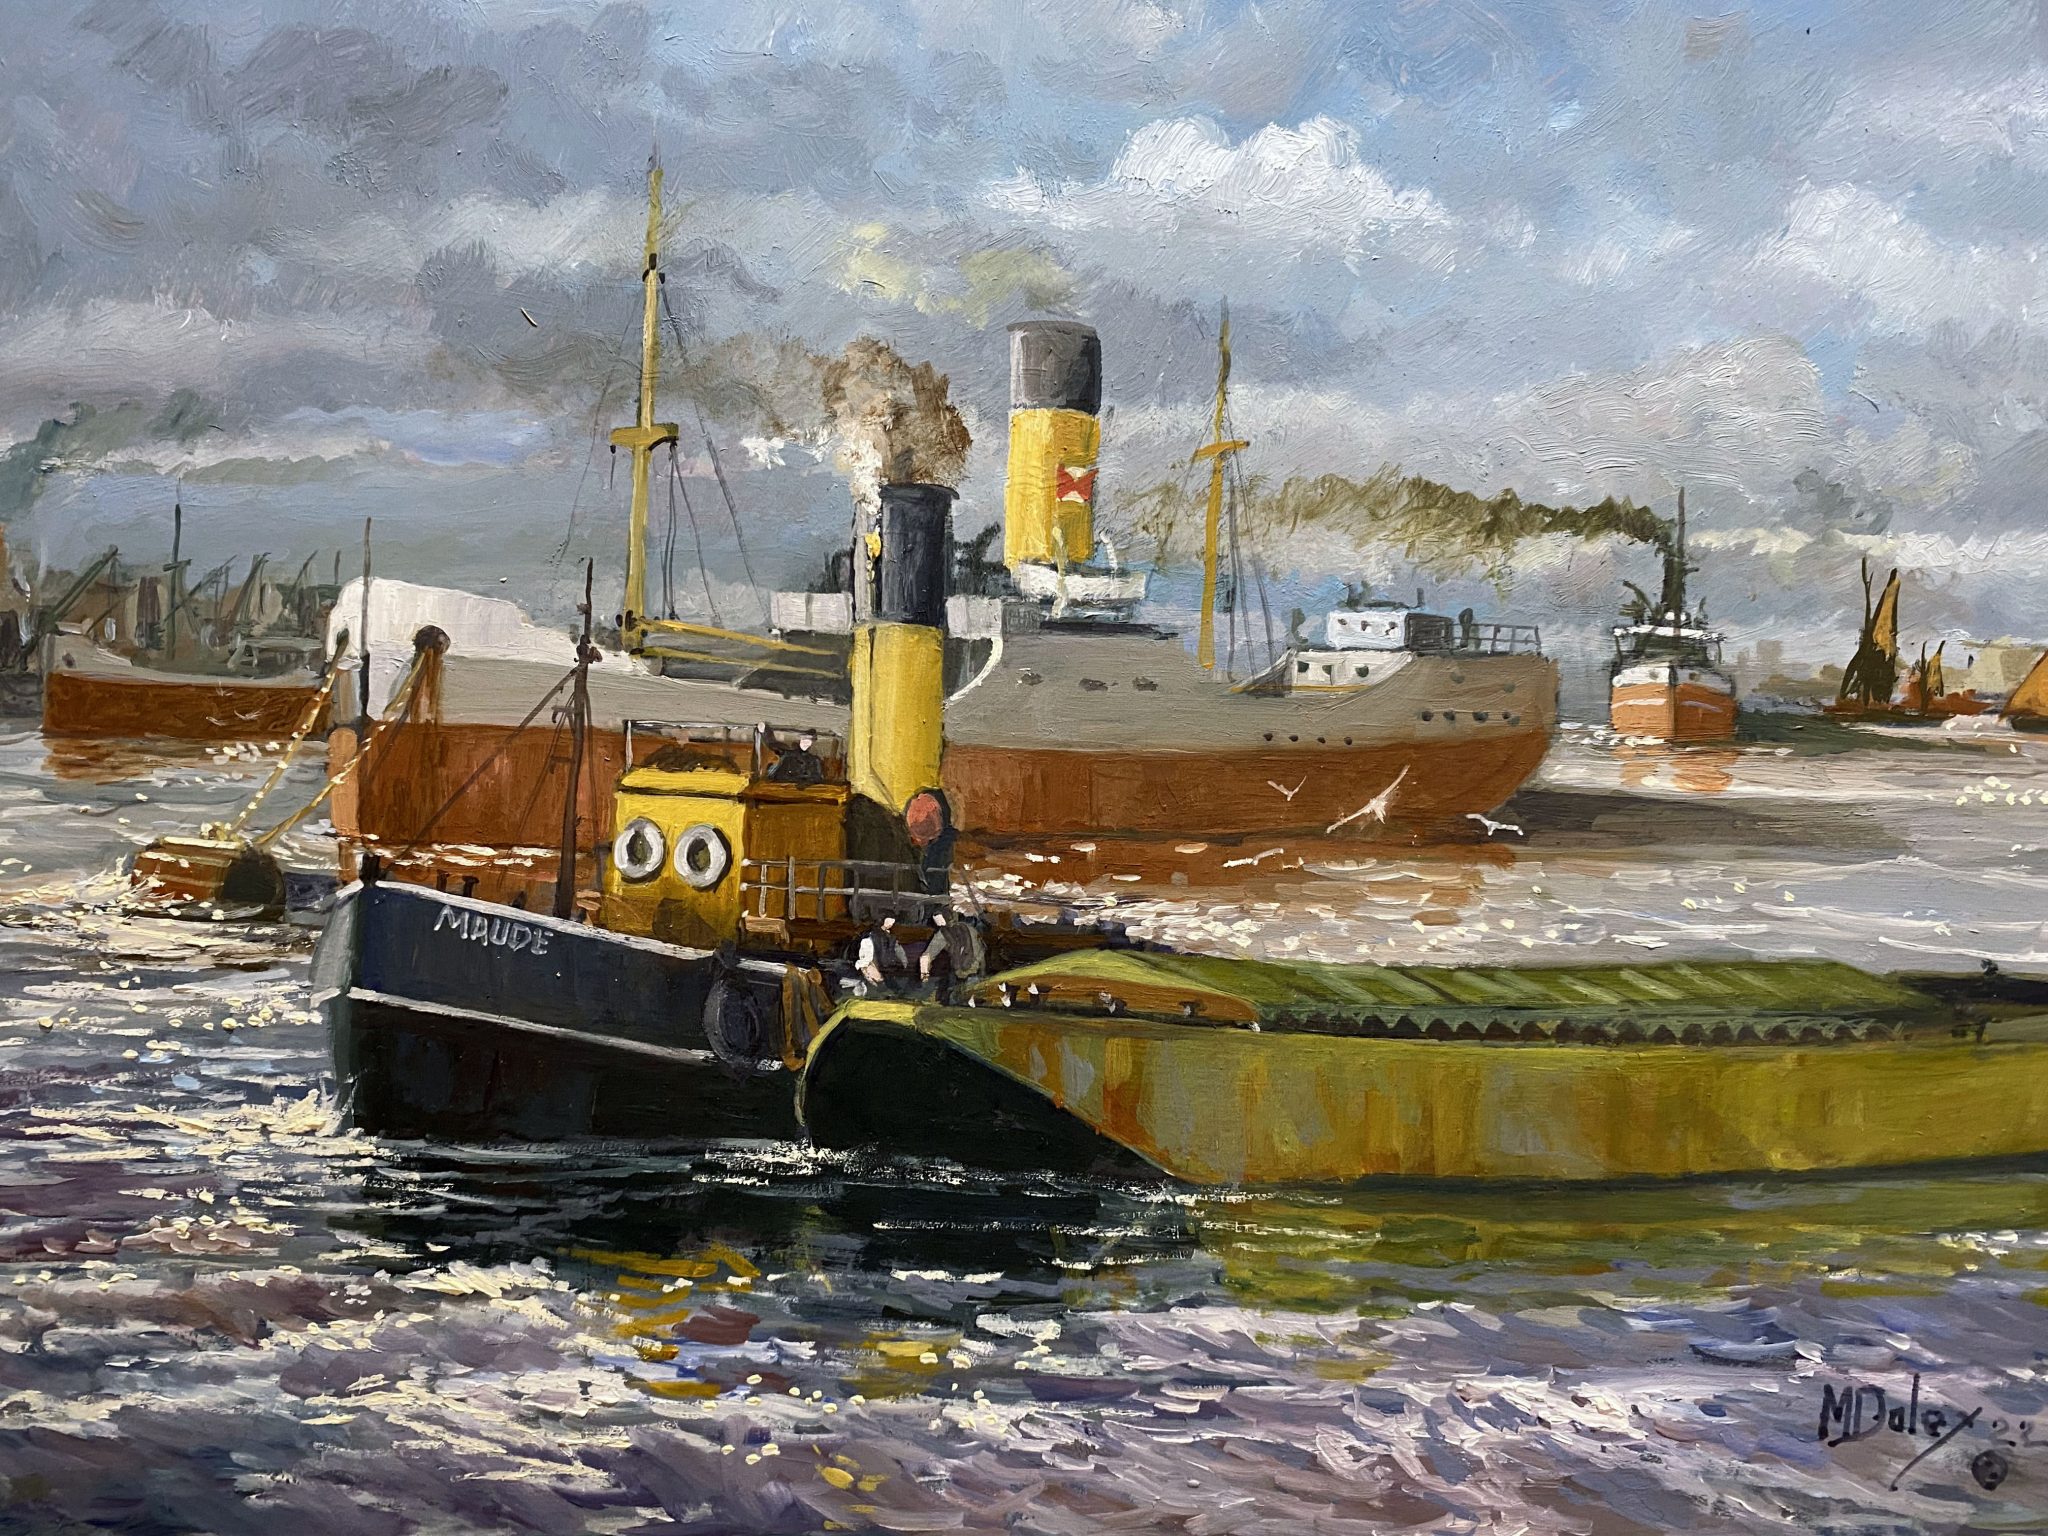 The Working River by artist Michael Daley